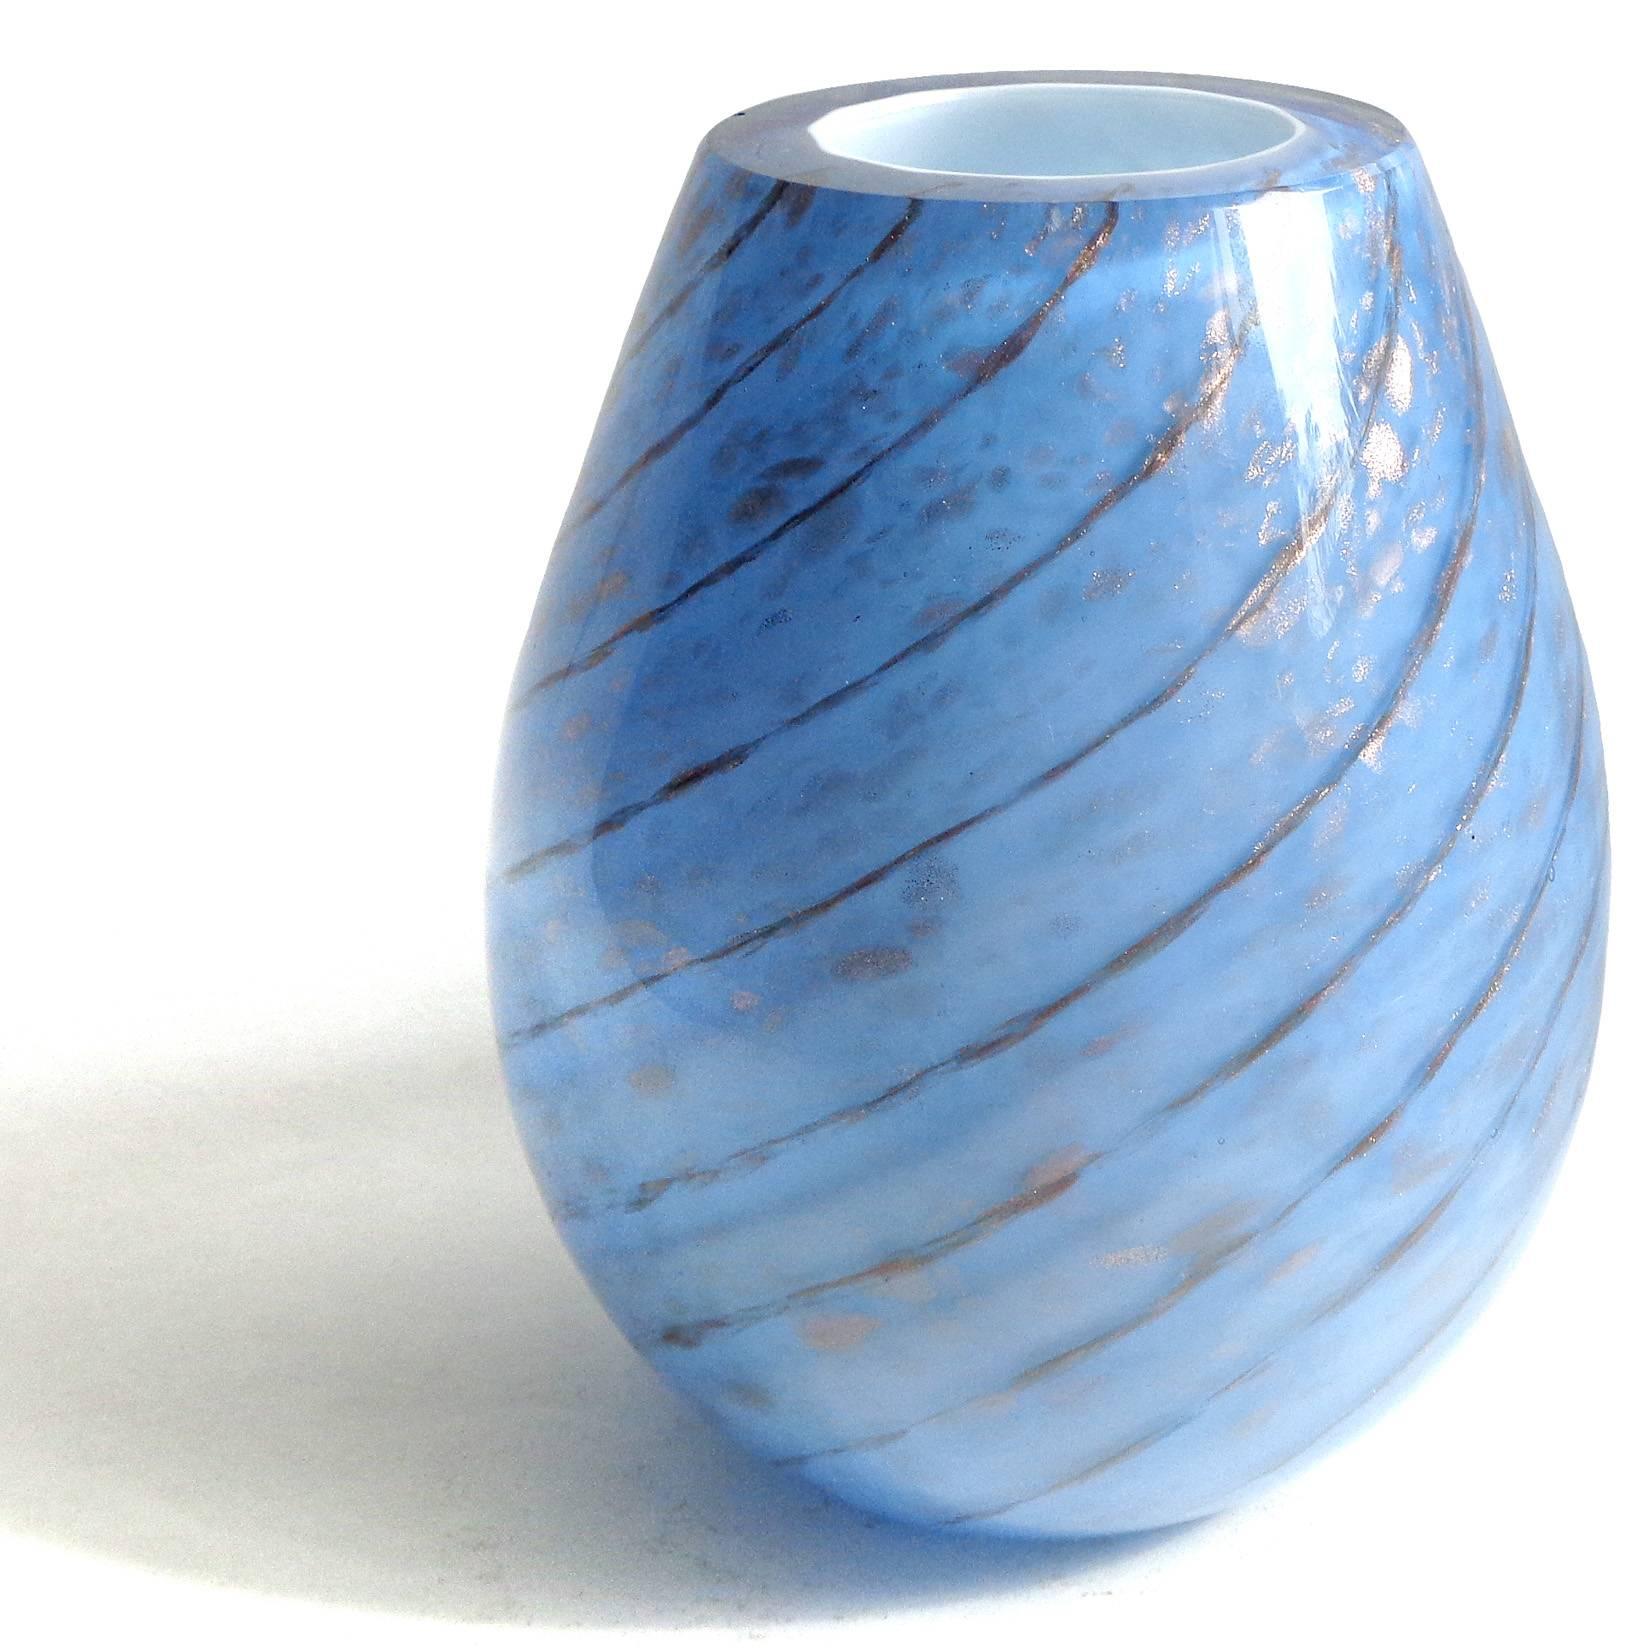 Beautiful Murano handblown blue over white and copper aventurine Italian art glass flower vase. Documented to the Fratelli Toso company. The piece has a candy cane swirl and glitters in the light. More vases in this design in my gallery. Also